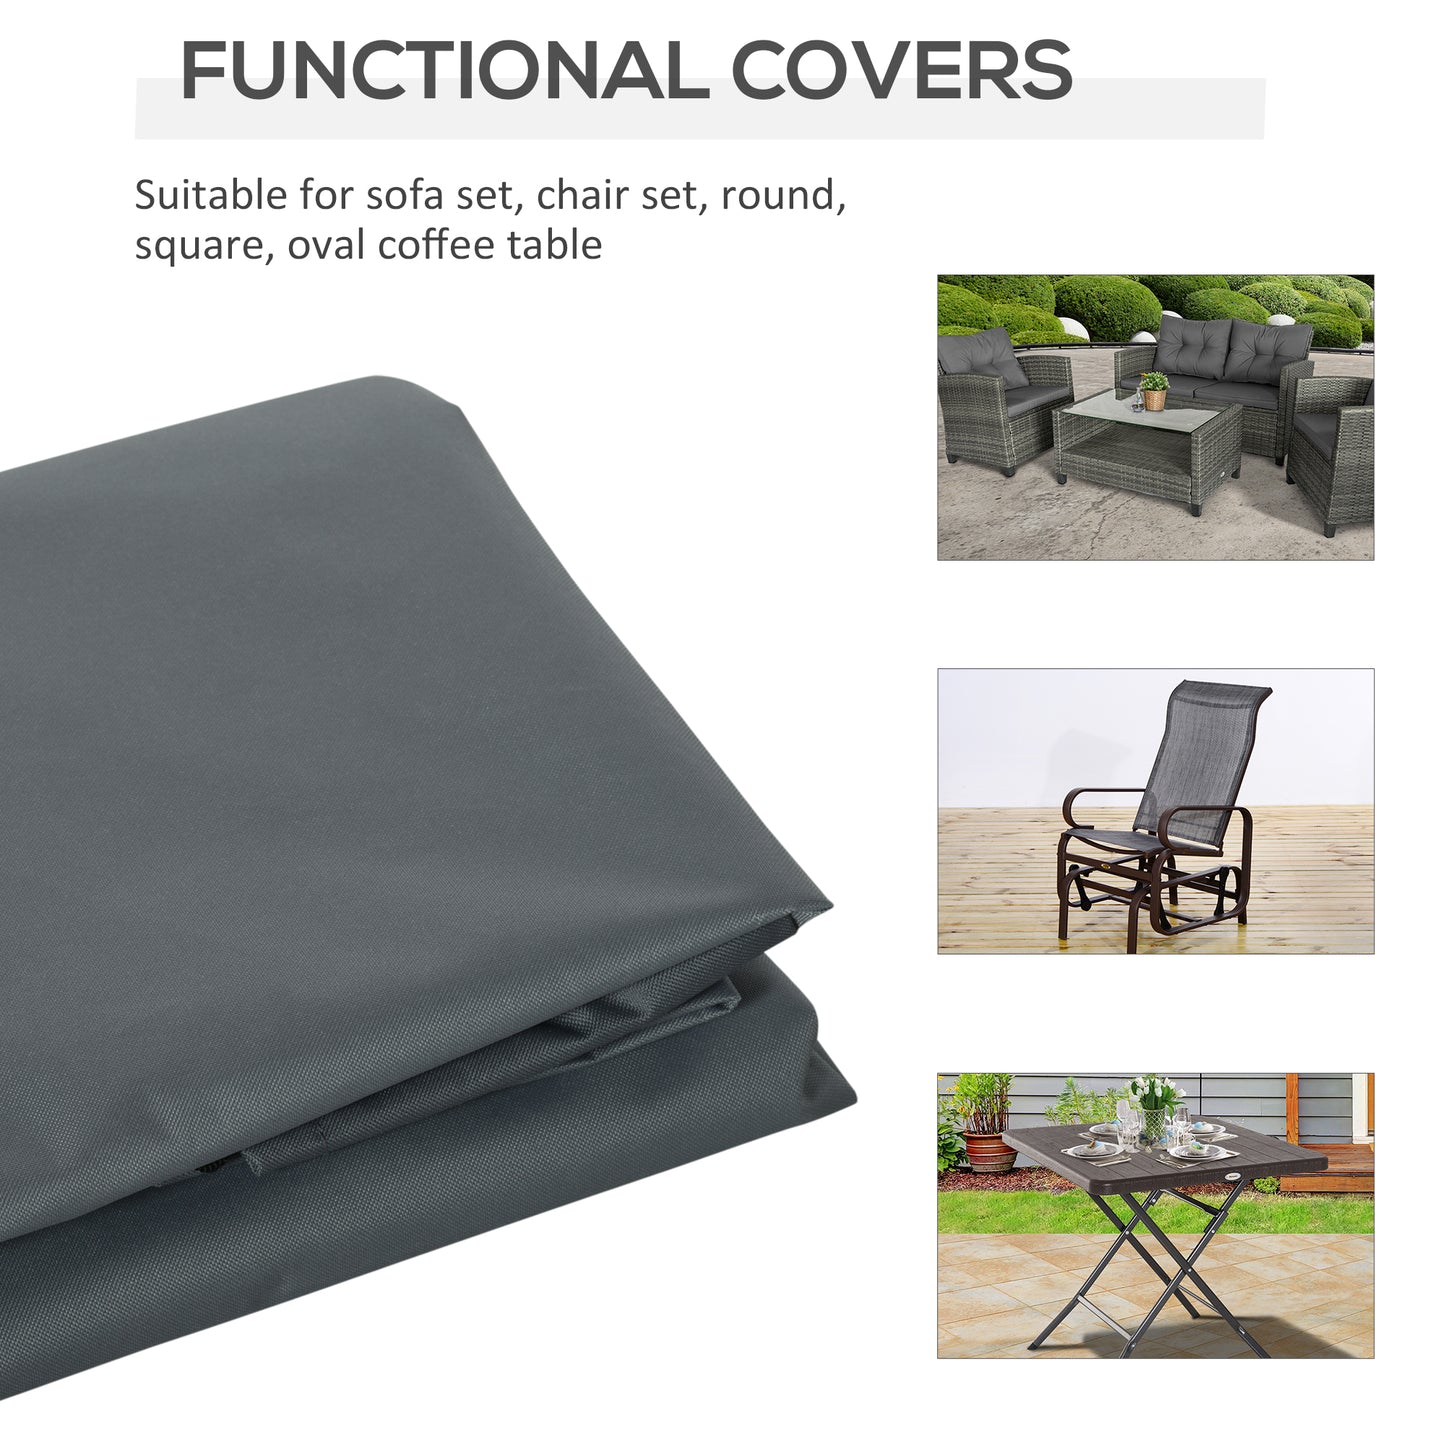 Outsunny Patio Furniture Cover, Rectangular Chair Protection, Water UV Resistant, 600D Oxford Fabric, 200 x 86 x 82 cm